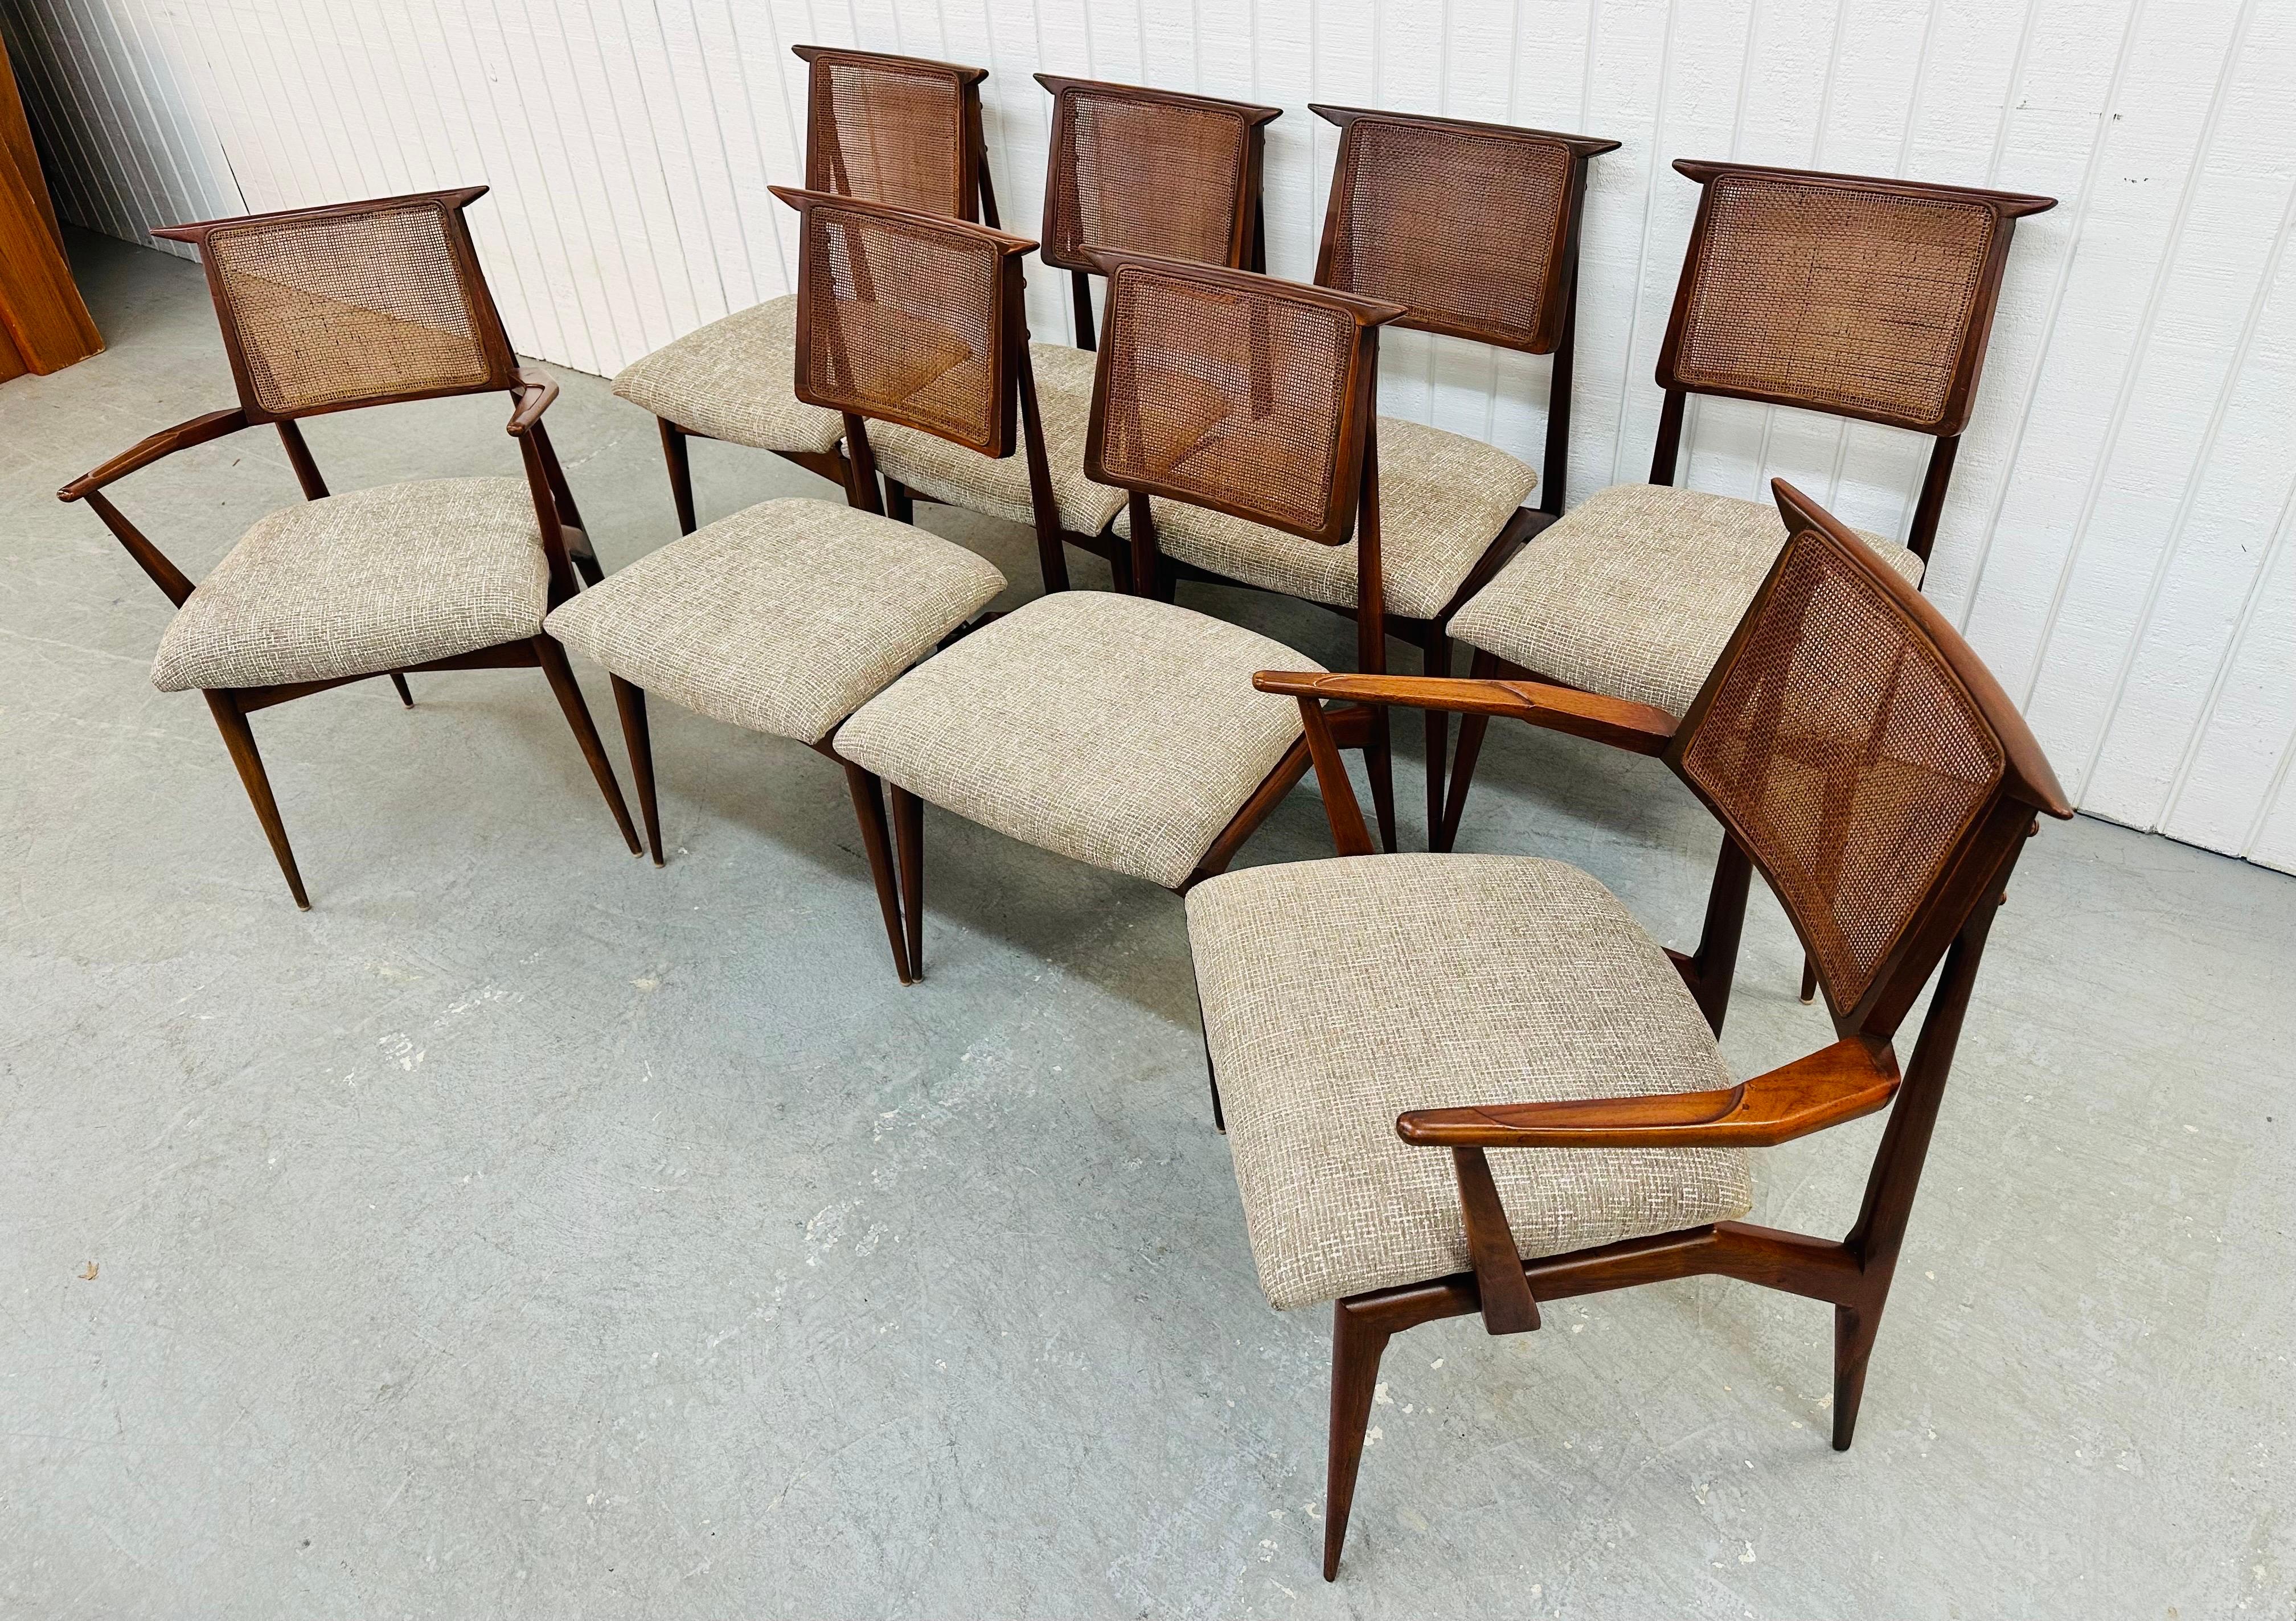 This listing is for a set of Mid-Century Modern Gio Ponti Style Walnut Dining Chairs. Featuring six straight chairs, two arm chairs, cane back rests, and newly upholstered gray seats. This is an exceptional combination of quality and design in the